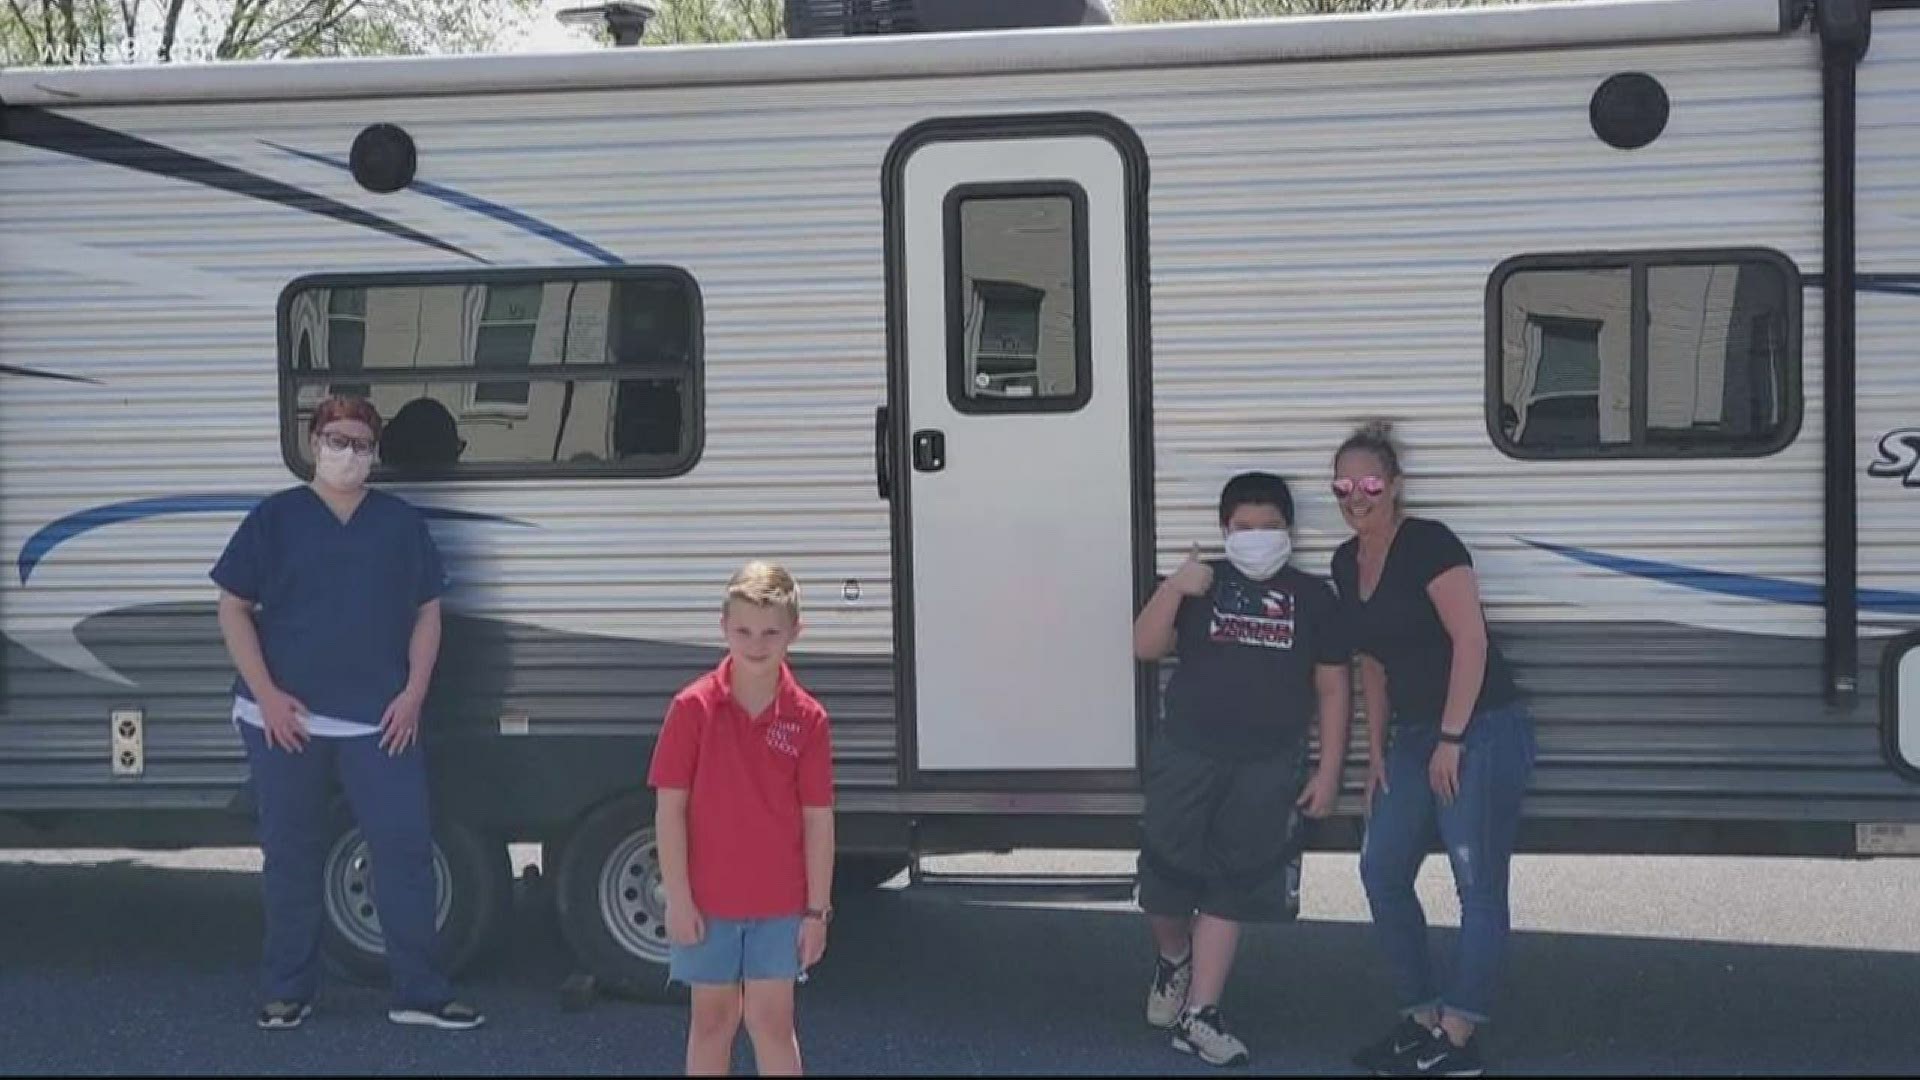 RVs 4 MDs helps those on the front lines of the coronavirus outbreak have a safe place to sleep.